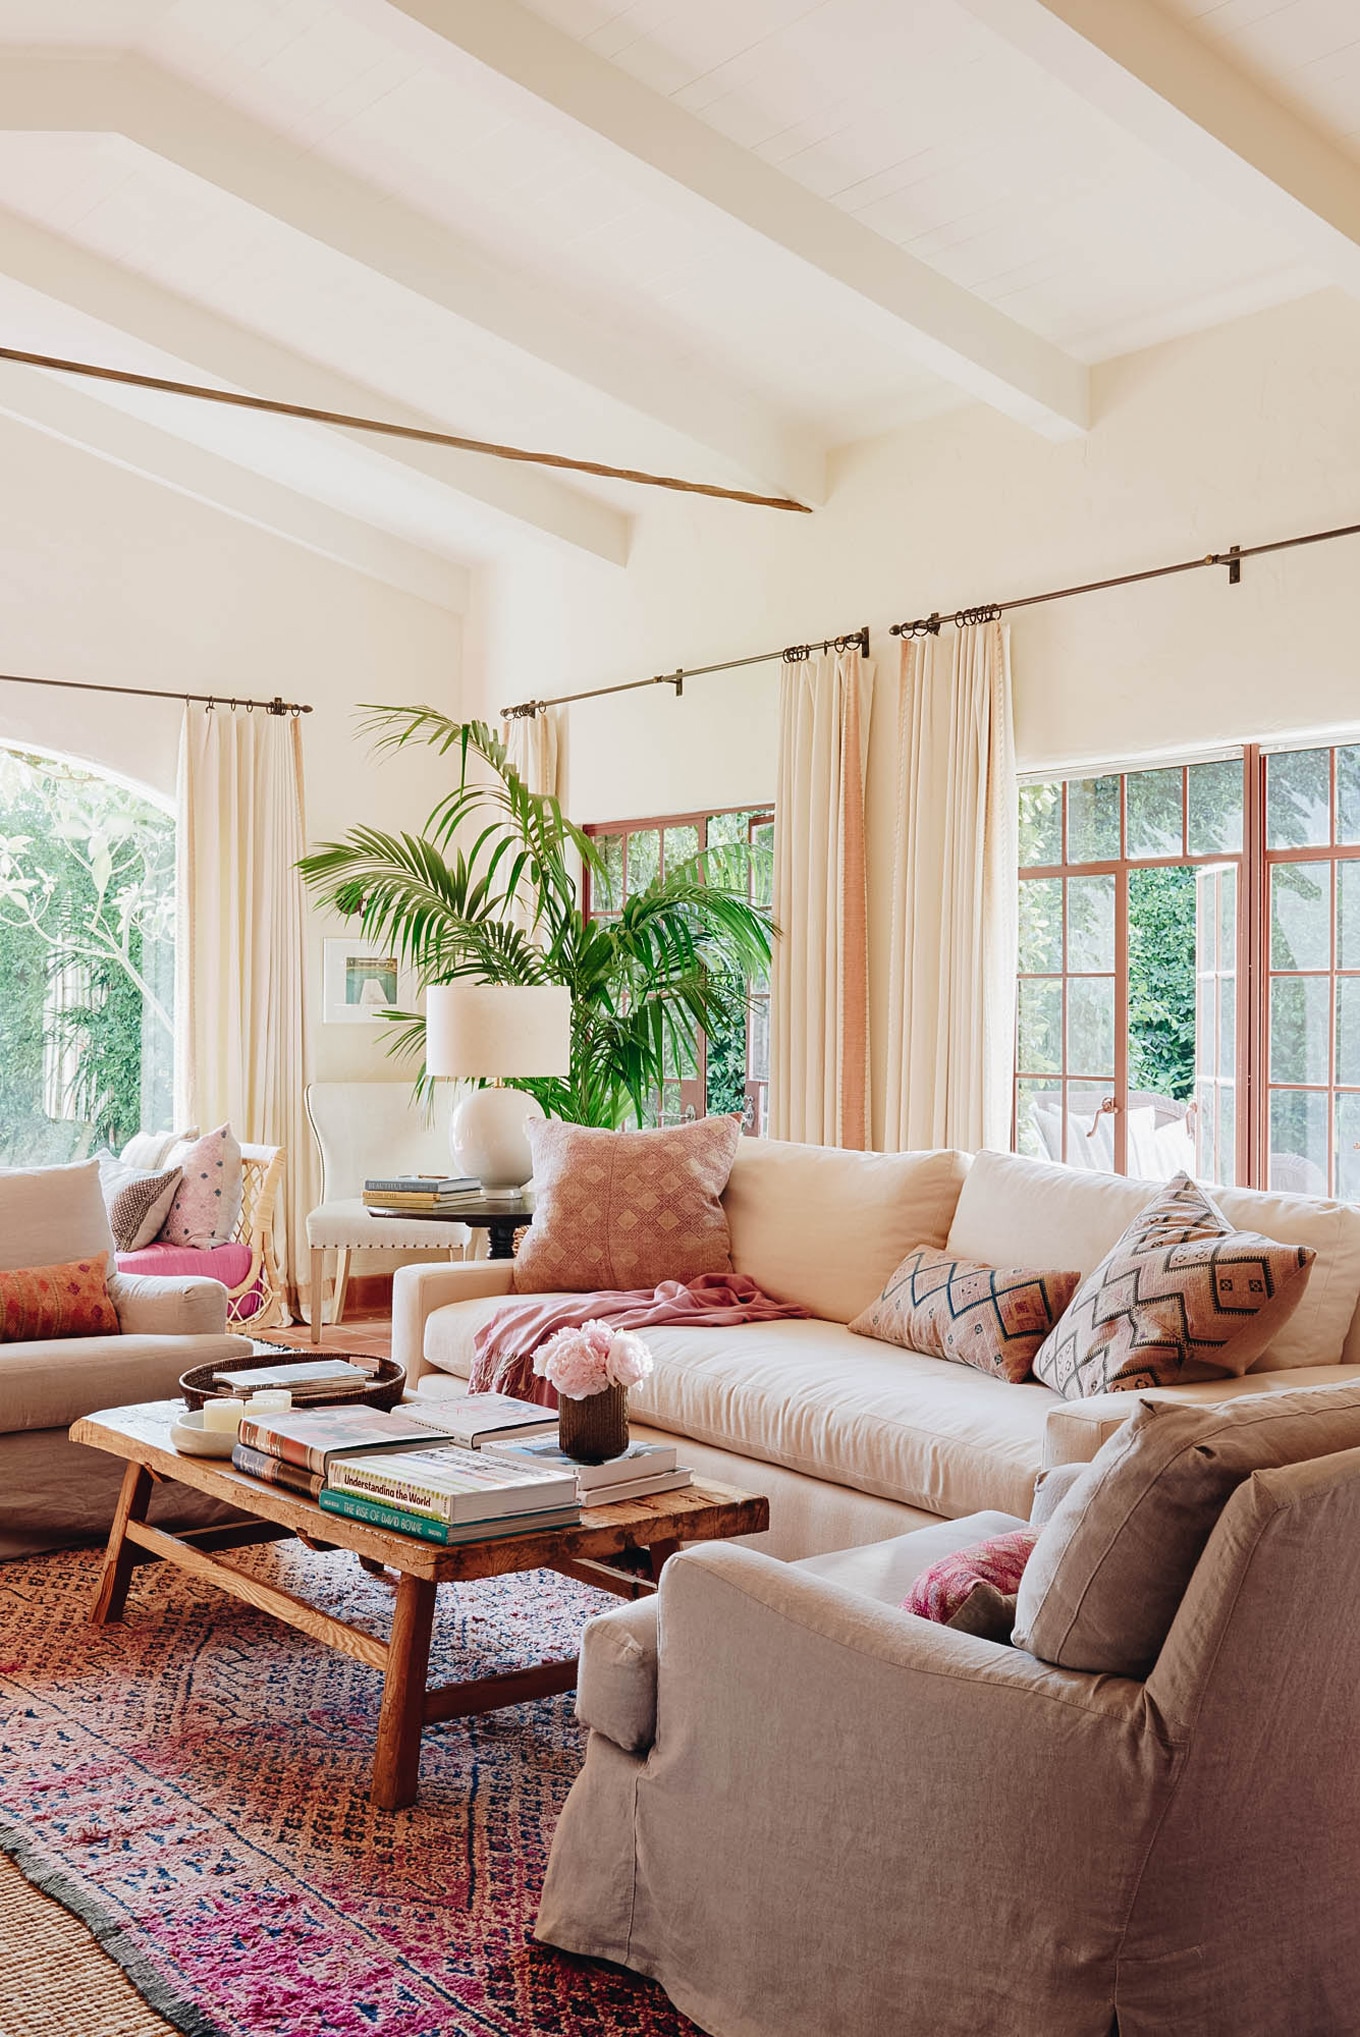 living room with pink moroccan rug and textiles with california hacienda style | coco kelley